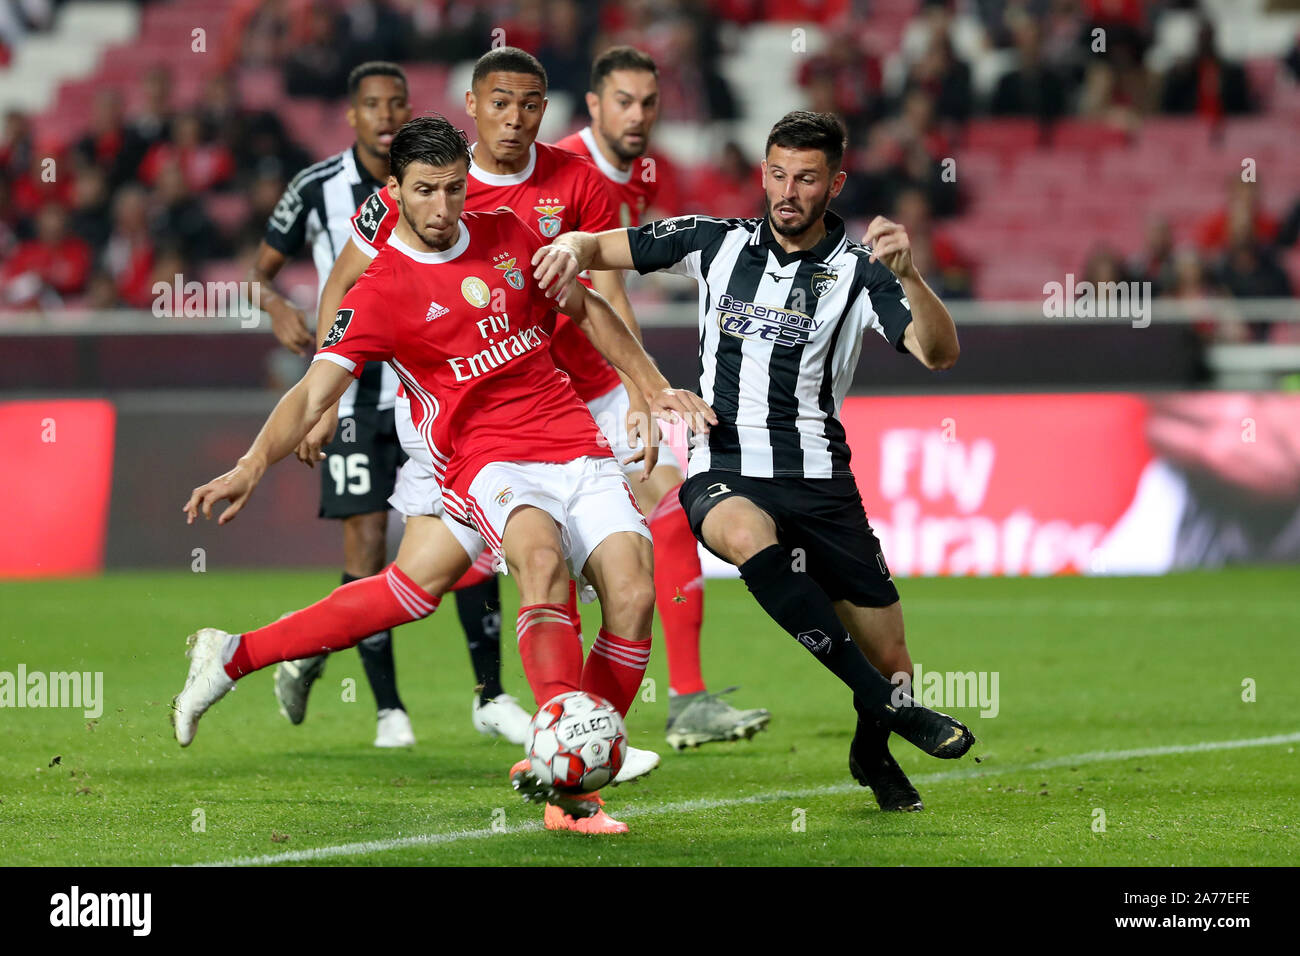 Lisbon, Portugal. 30th Oct, 2019. Ruben Dias (front L) of Benfica shoots and scores during the Portuguese League football match against Portimonense at the Luz stadium in Lisbon, Portugal, on Oct. 30, 2019. Credit: Pedro Fiuza/Xinhua/Alamy Live News Stock Photo